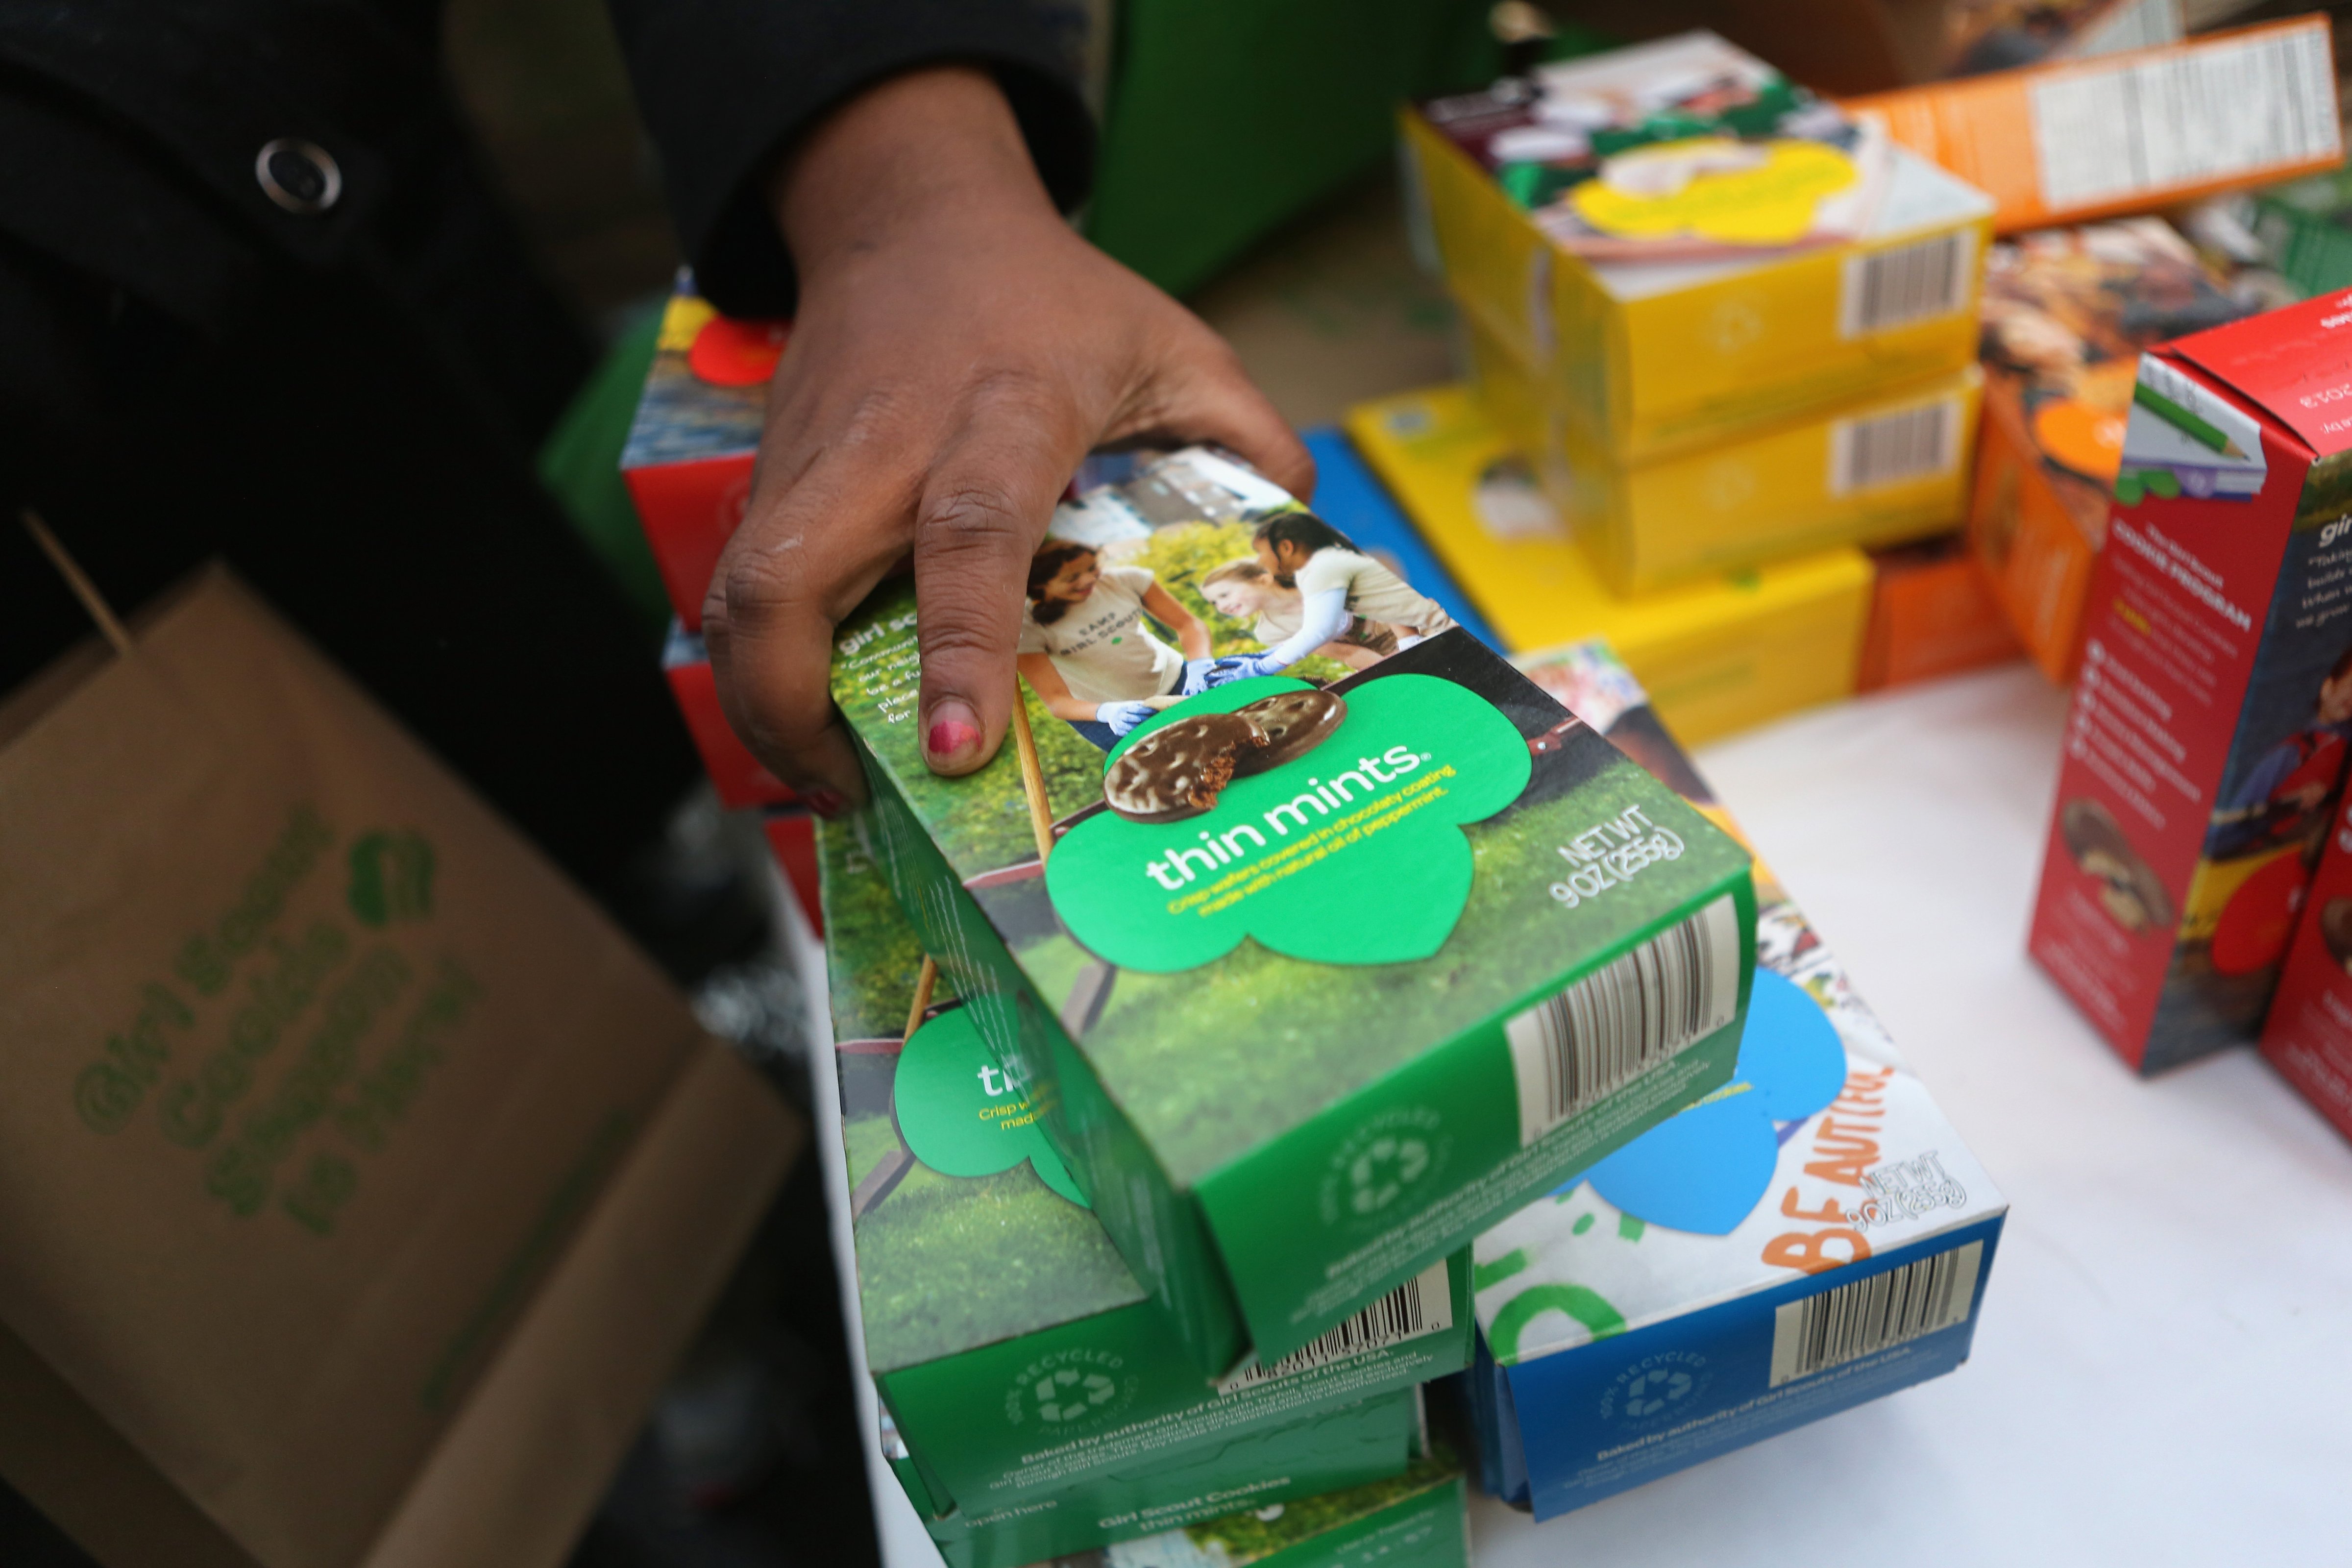 Girl Scouts sell cookies on Feb. 8, 2013 in New York City. (John Moore—Getty Images)